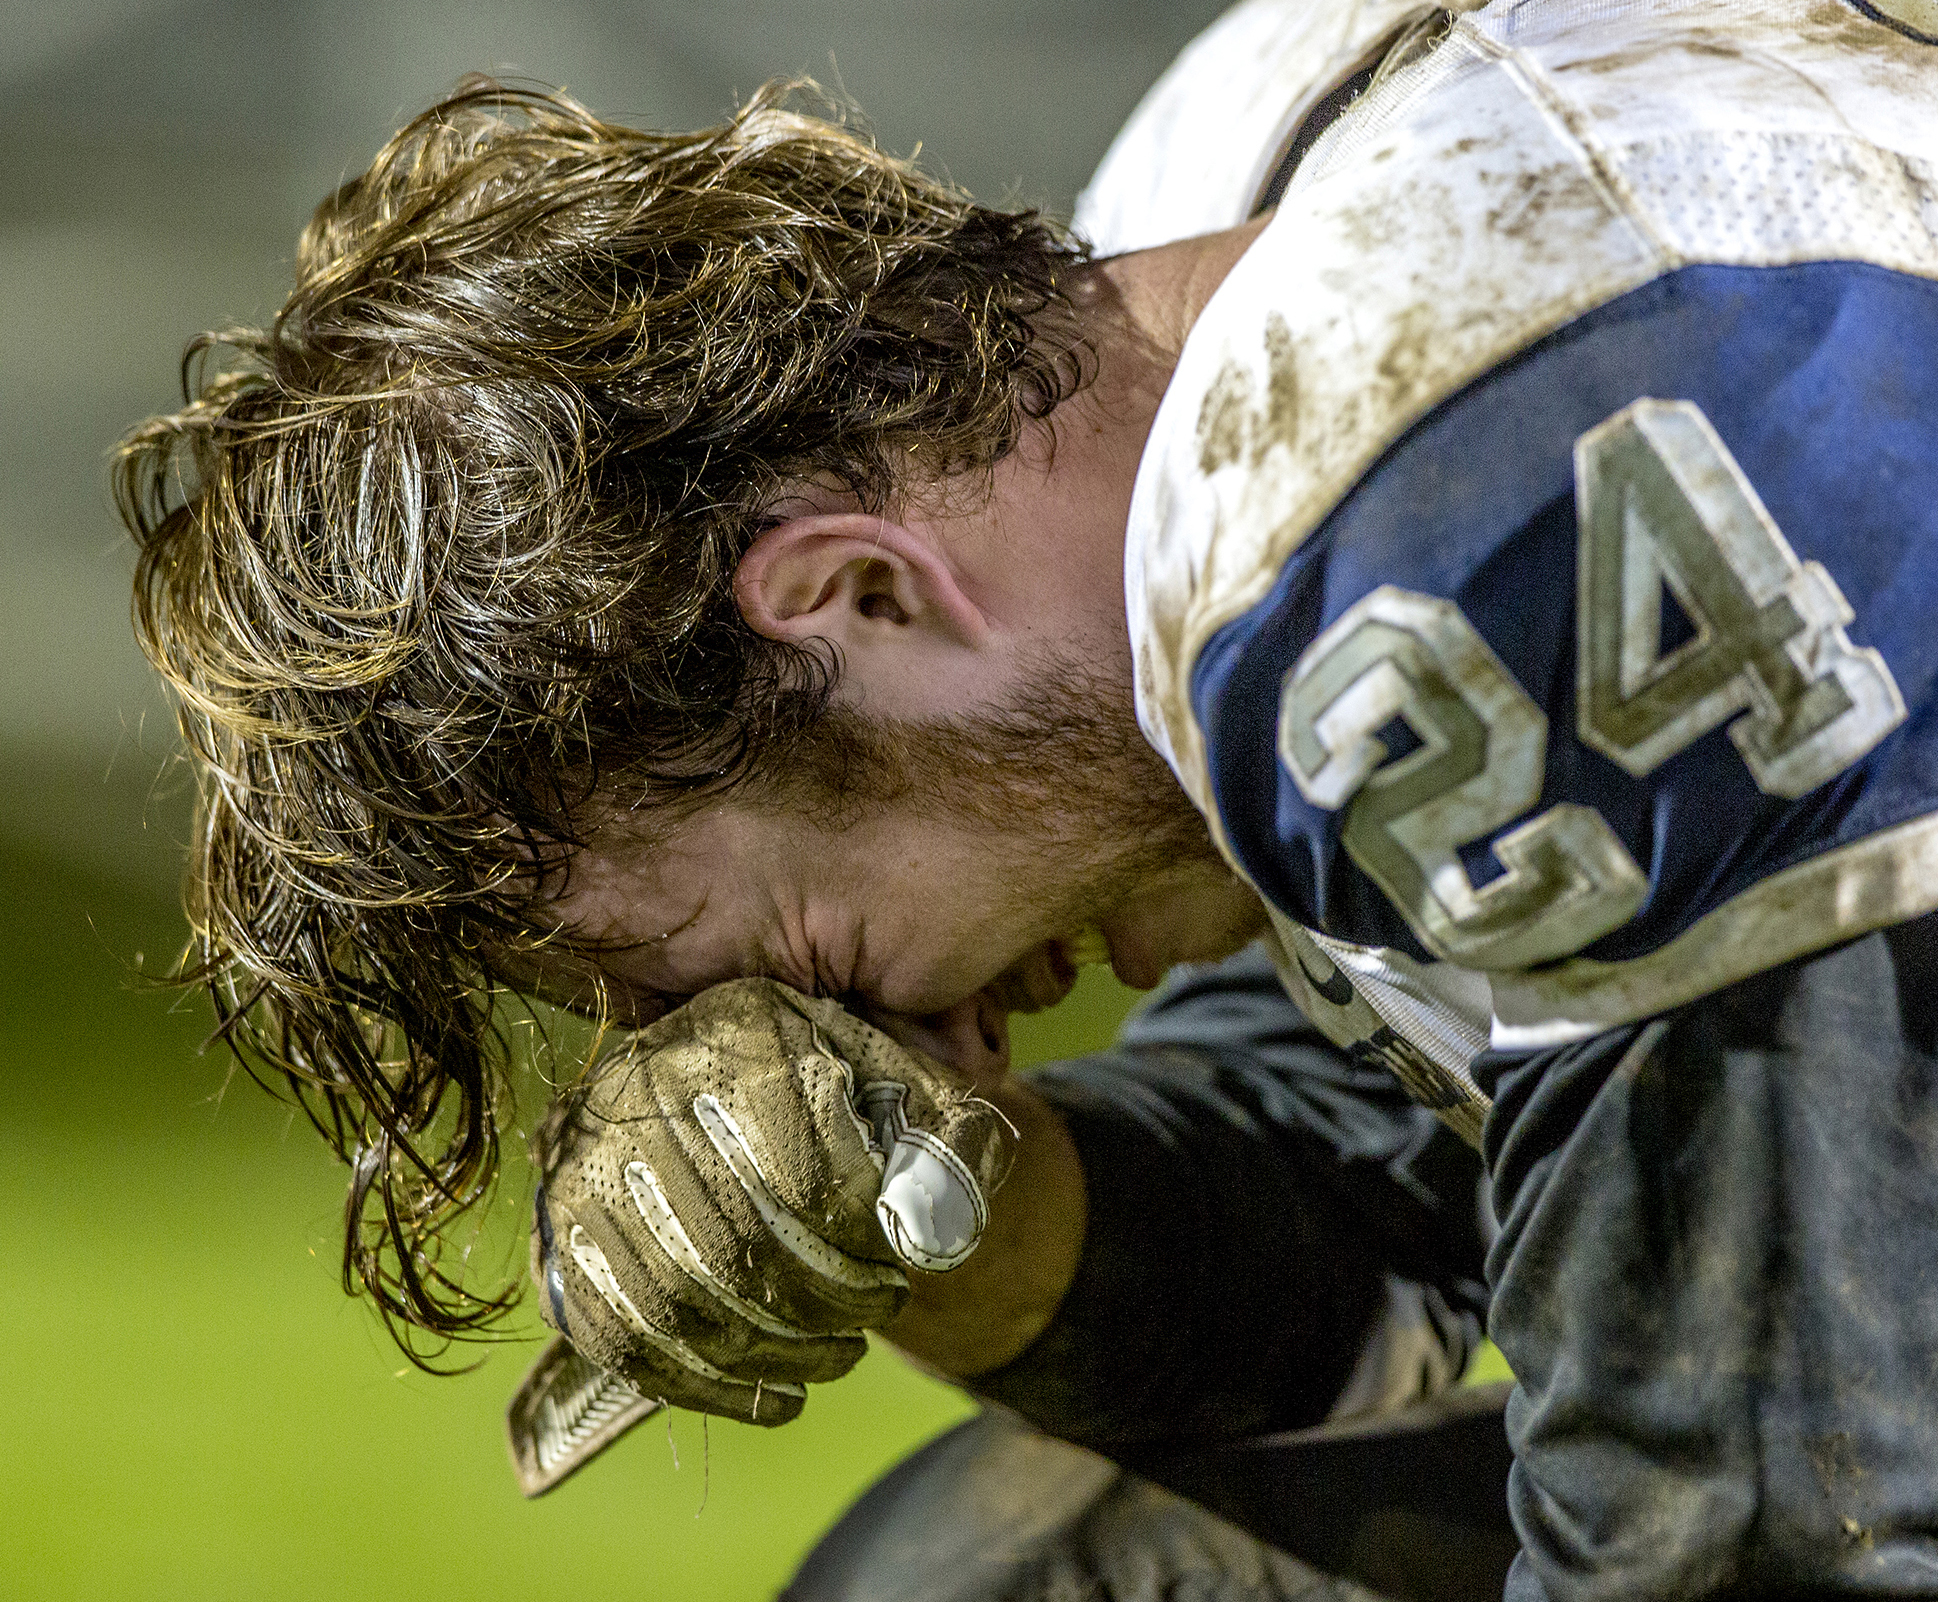  The Millers' linebacker Loudin Gariott (#24) holds his head after his team suffered a loss to Thurston High School. Springfield lost to Thurston 39-36 in the last game of the season. For seniors on the team like Gariott the last game is made even mo